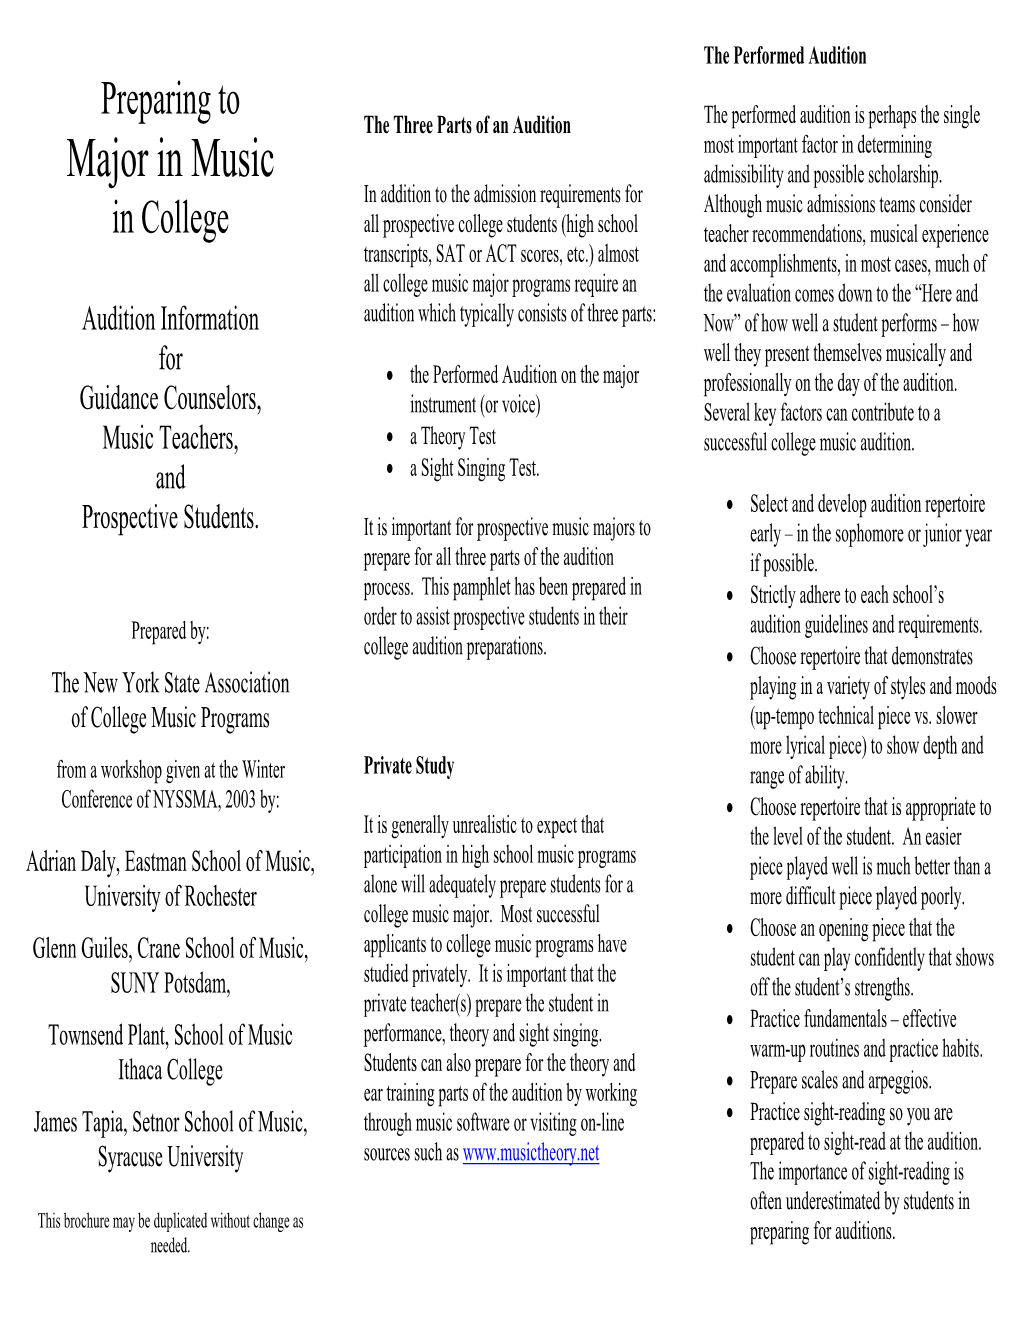 Major in Music Admissibility and Possible Scholarship